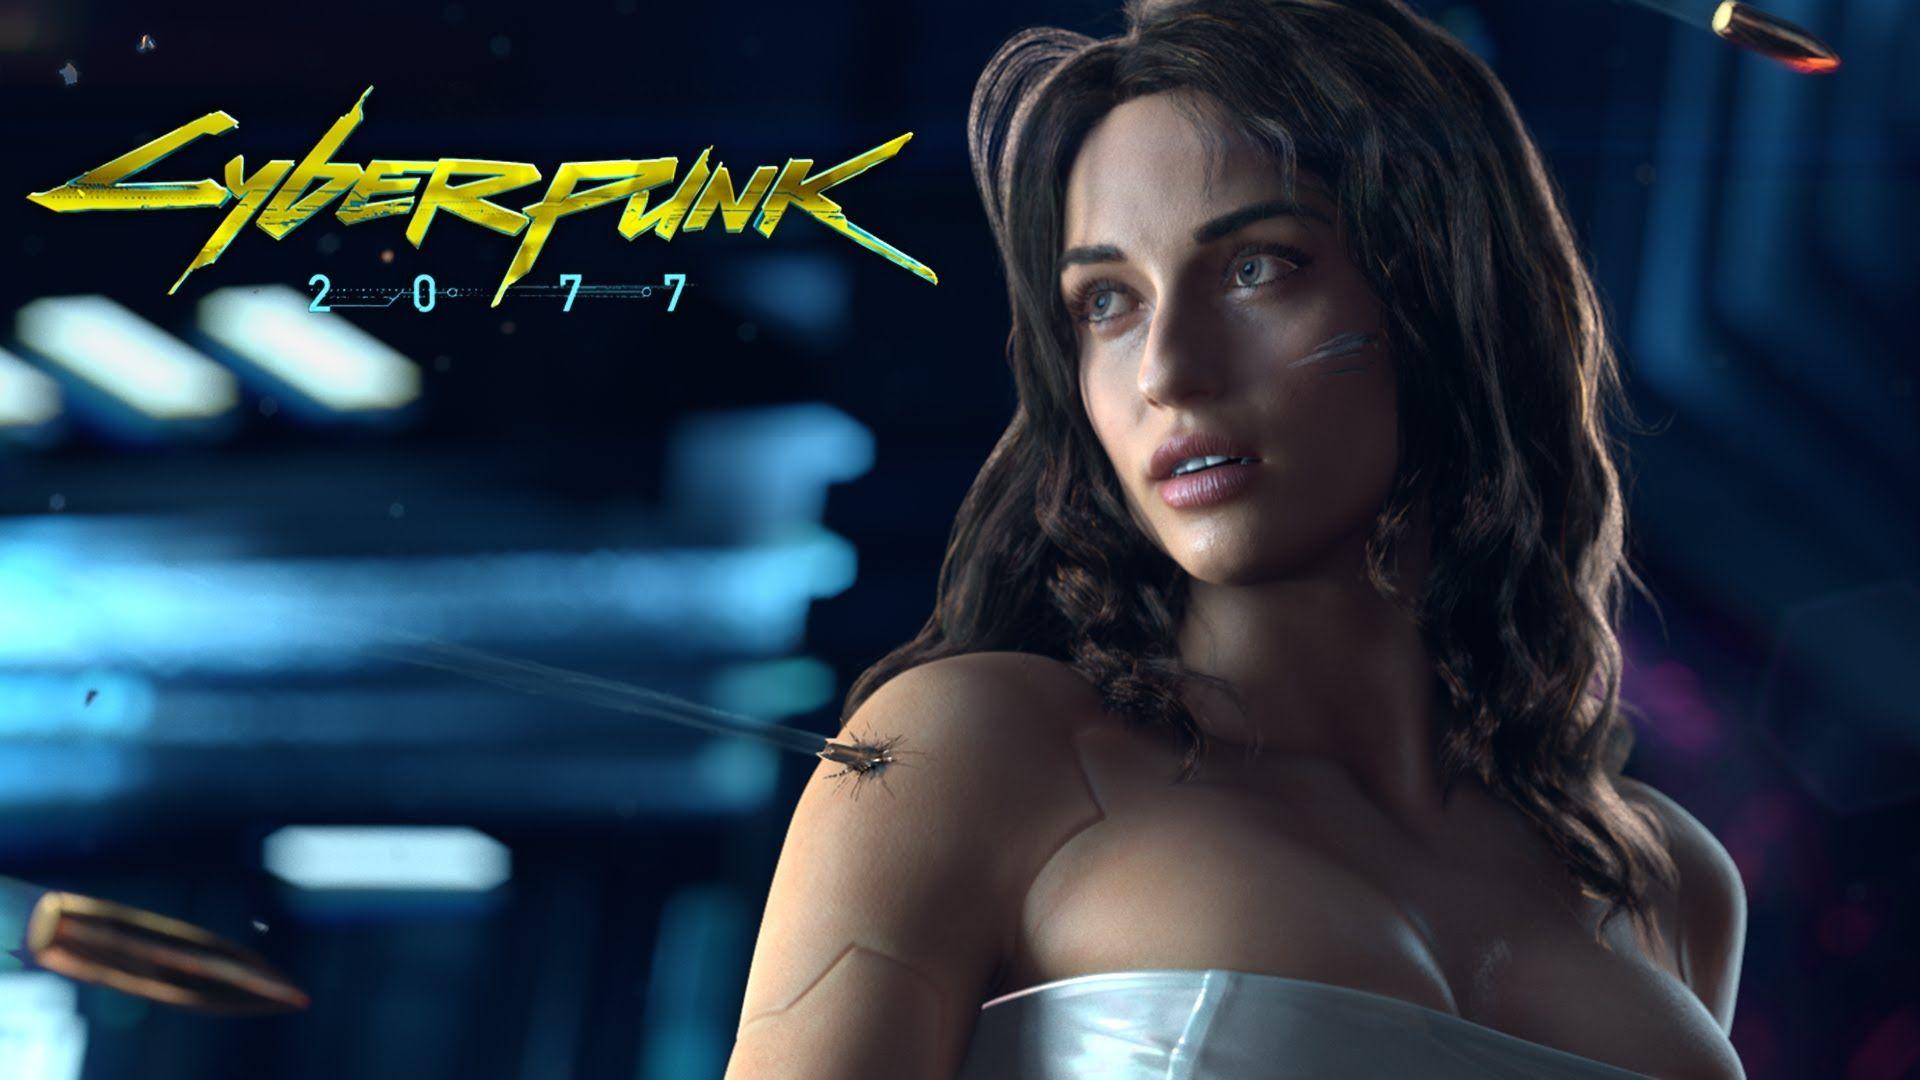 Cyberpunk 2077 will include online elements according to CD Projekt